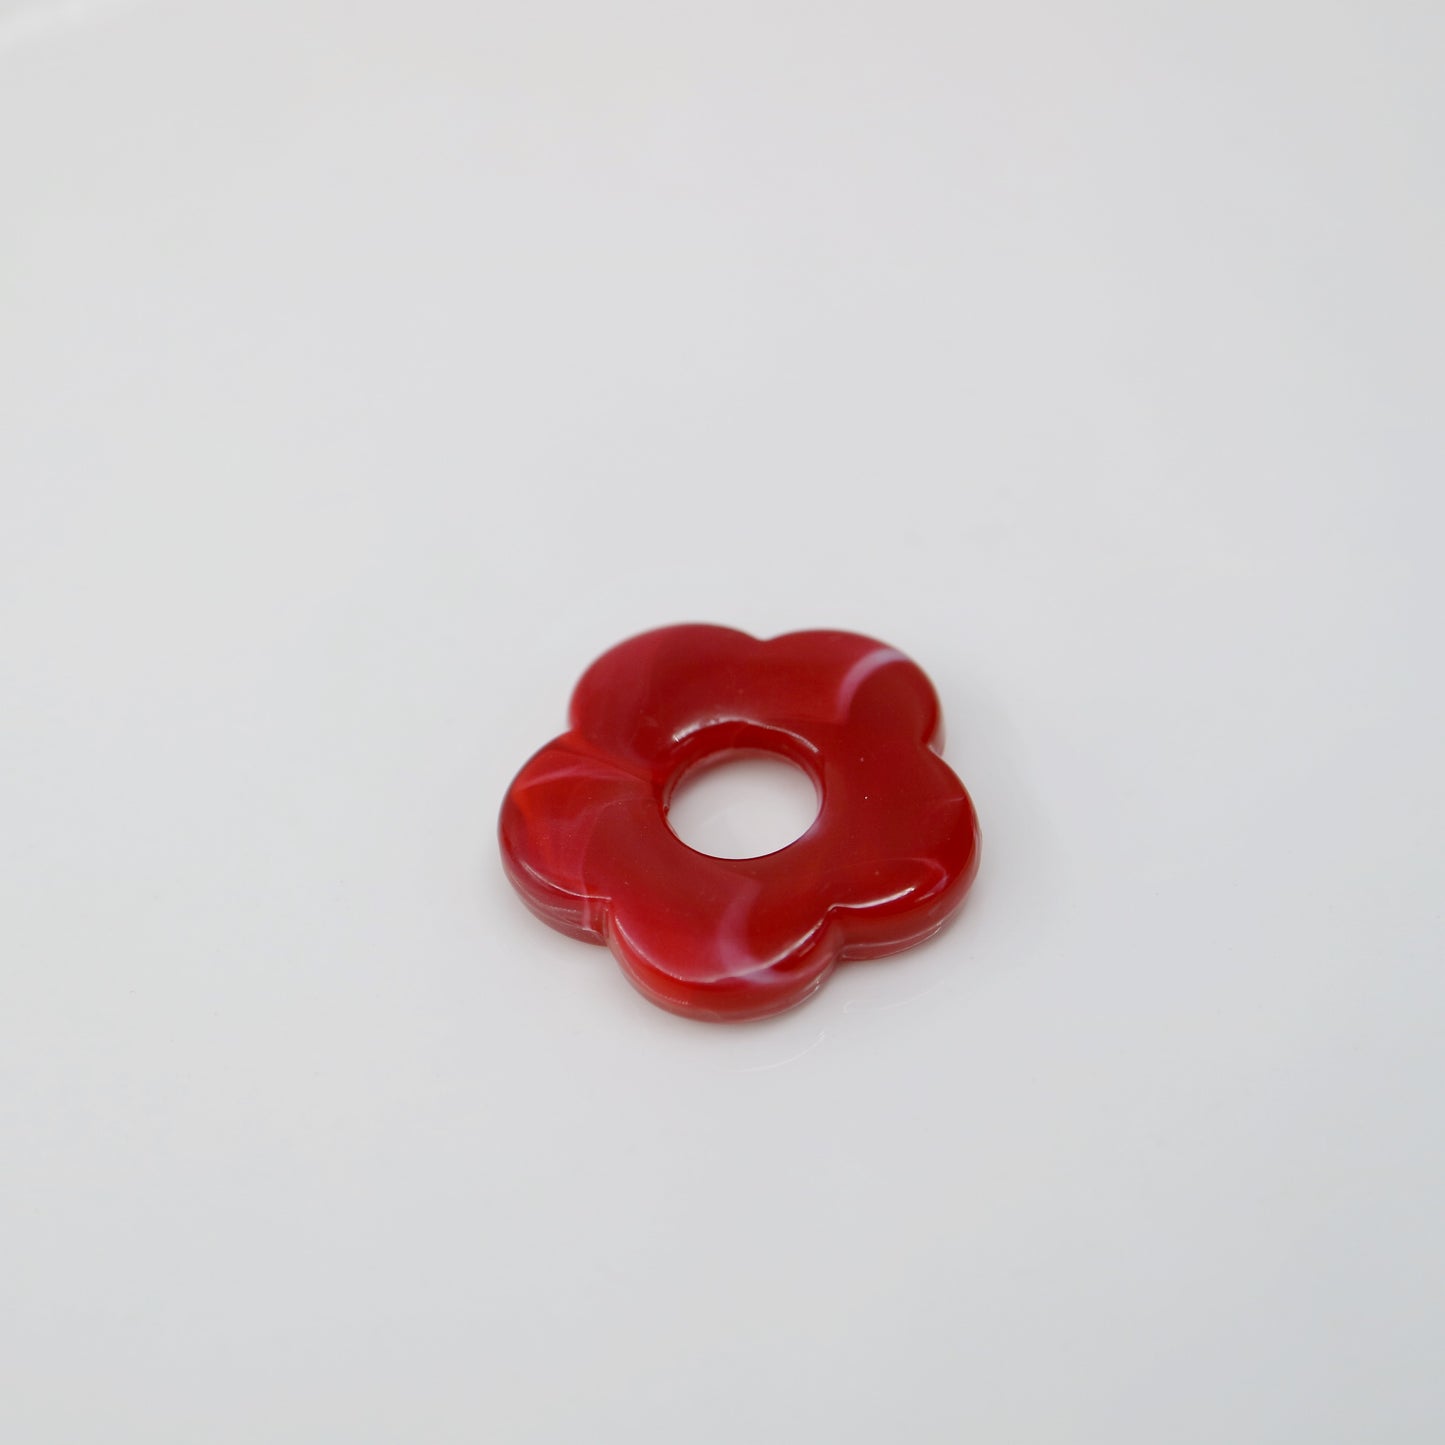 Flower Power Acrylic Charm in cherry red